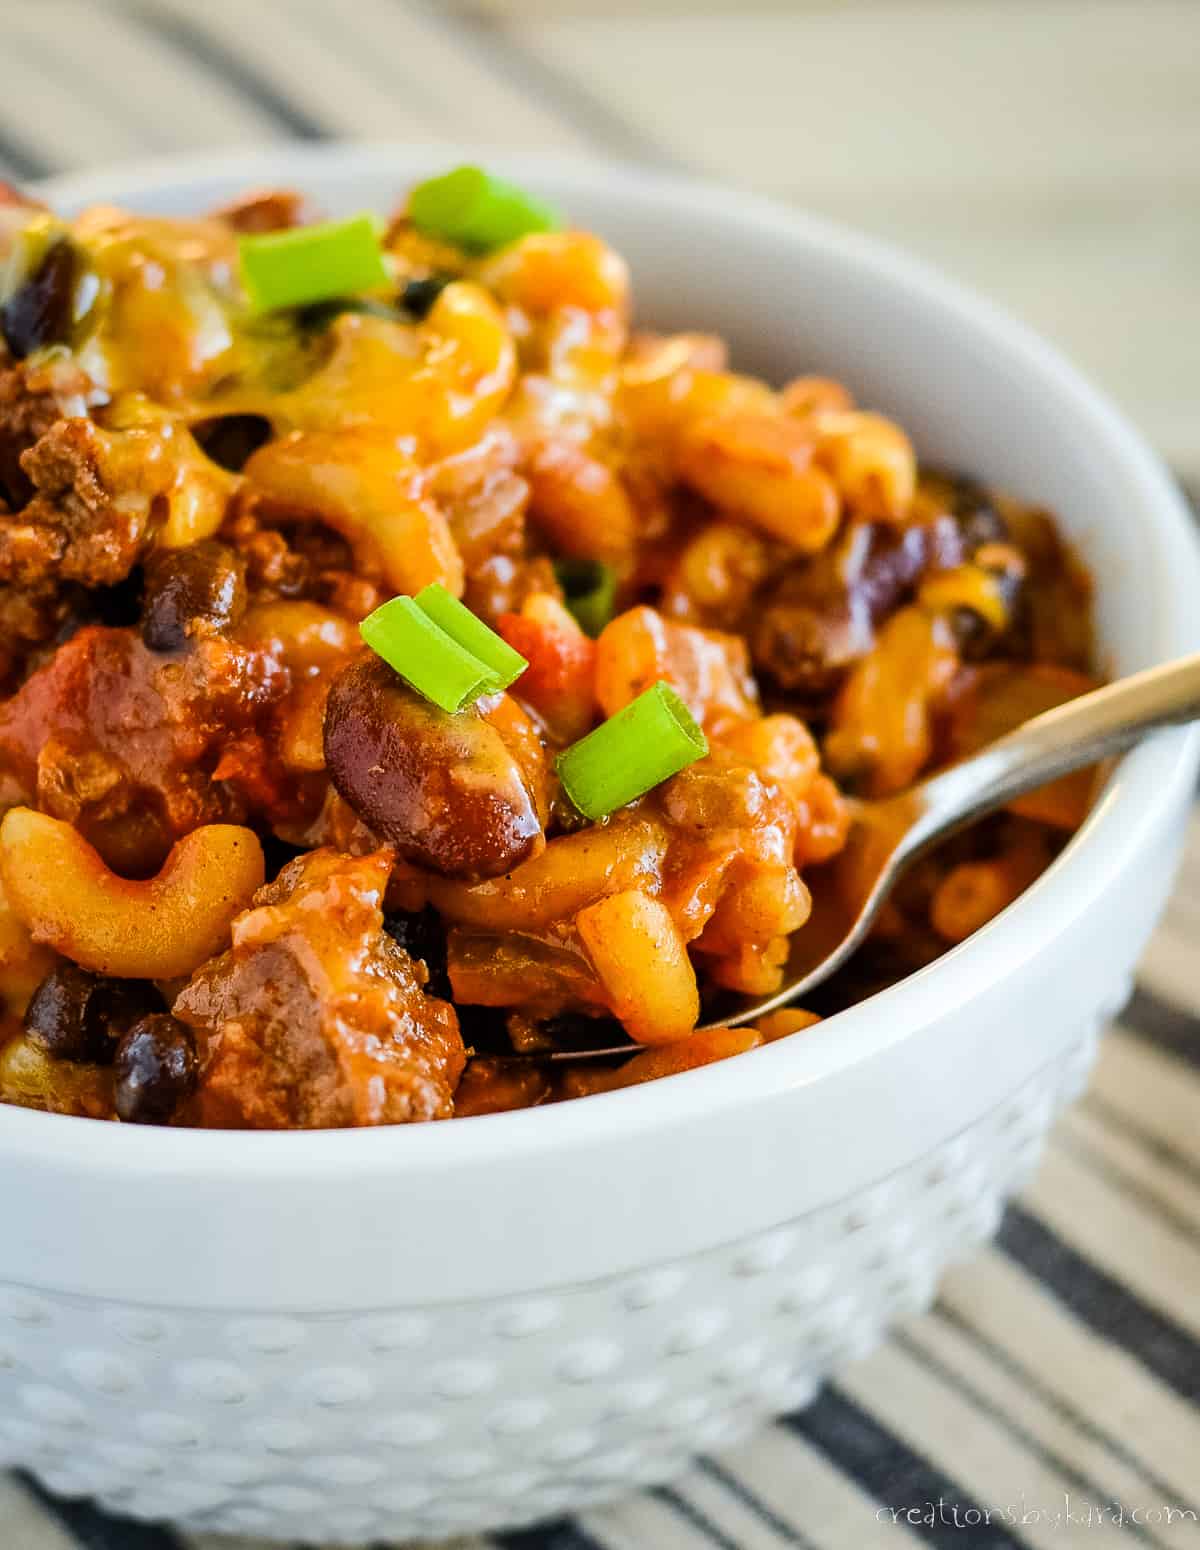 bowl of chili and macaroni with cheese